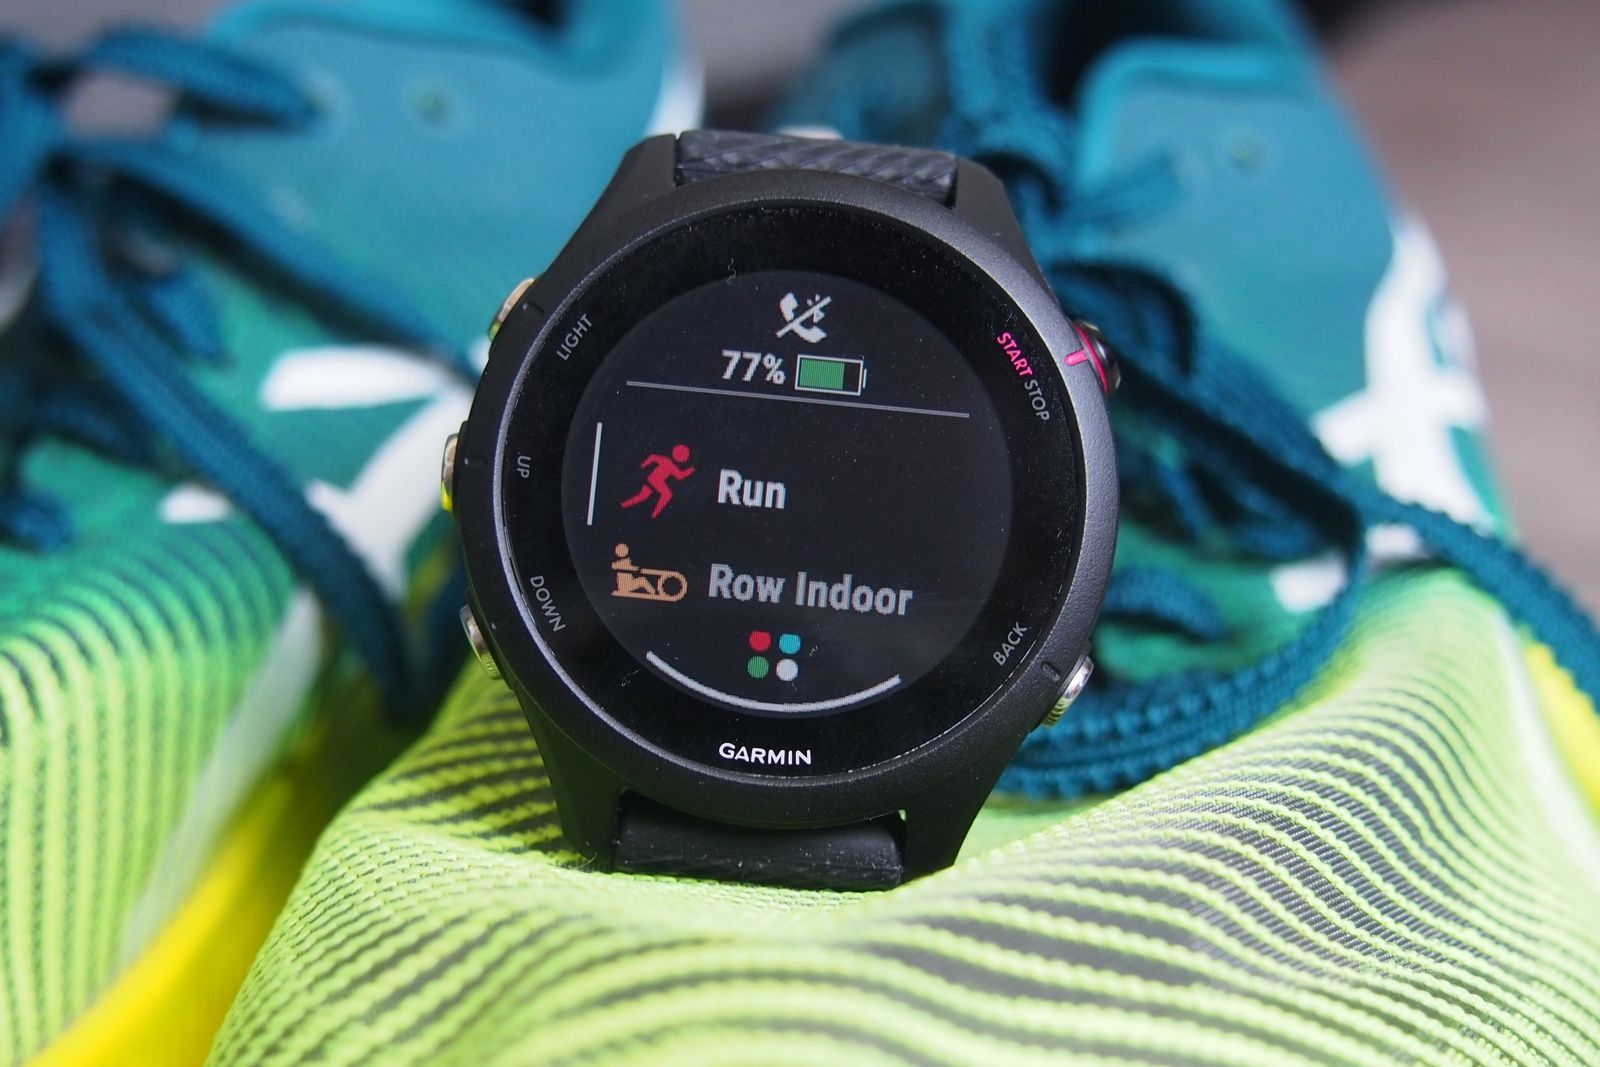 Garmin Forerunner 255 and 955 with bigger batteries and touchscreen!